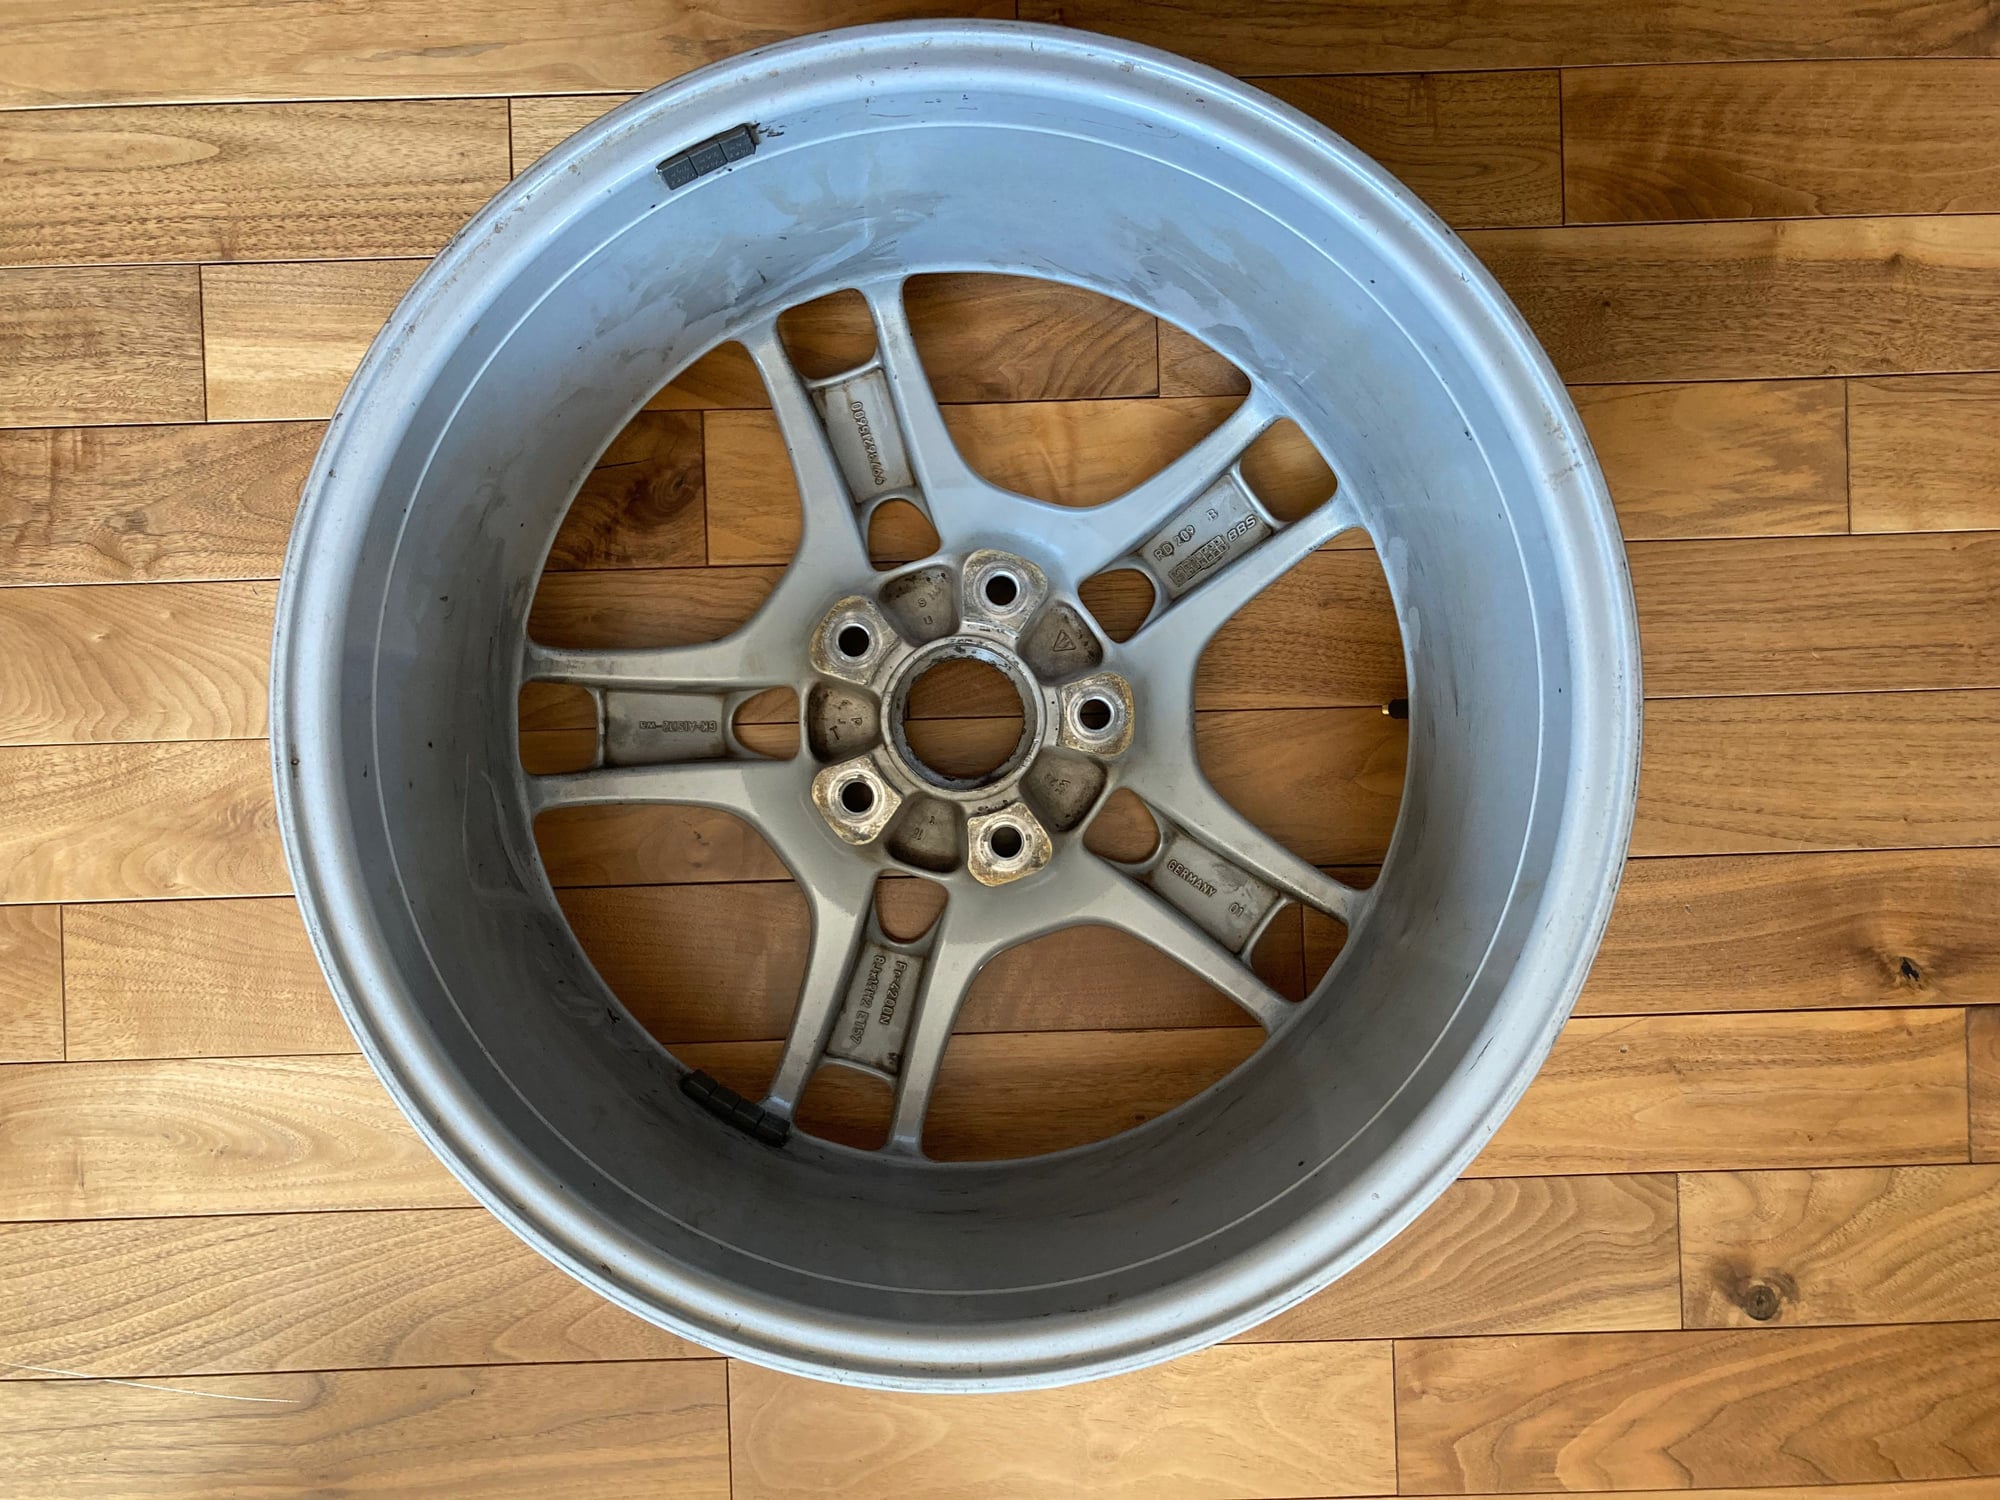 Wheels and Tires/Axles - Porsche Rims - Used - 0  All Models - Calgary, AB T3H5Z1, Canada